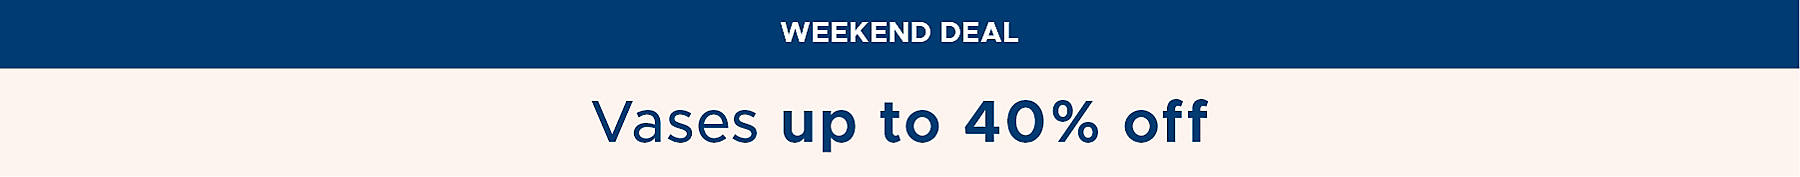 Weekend Deal Vases up to 40% off